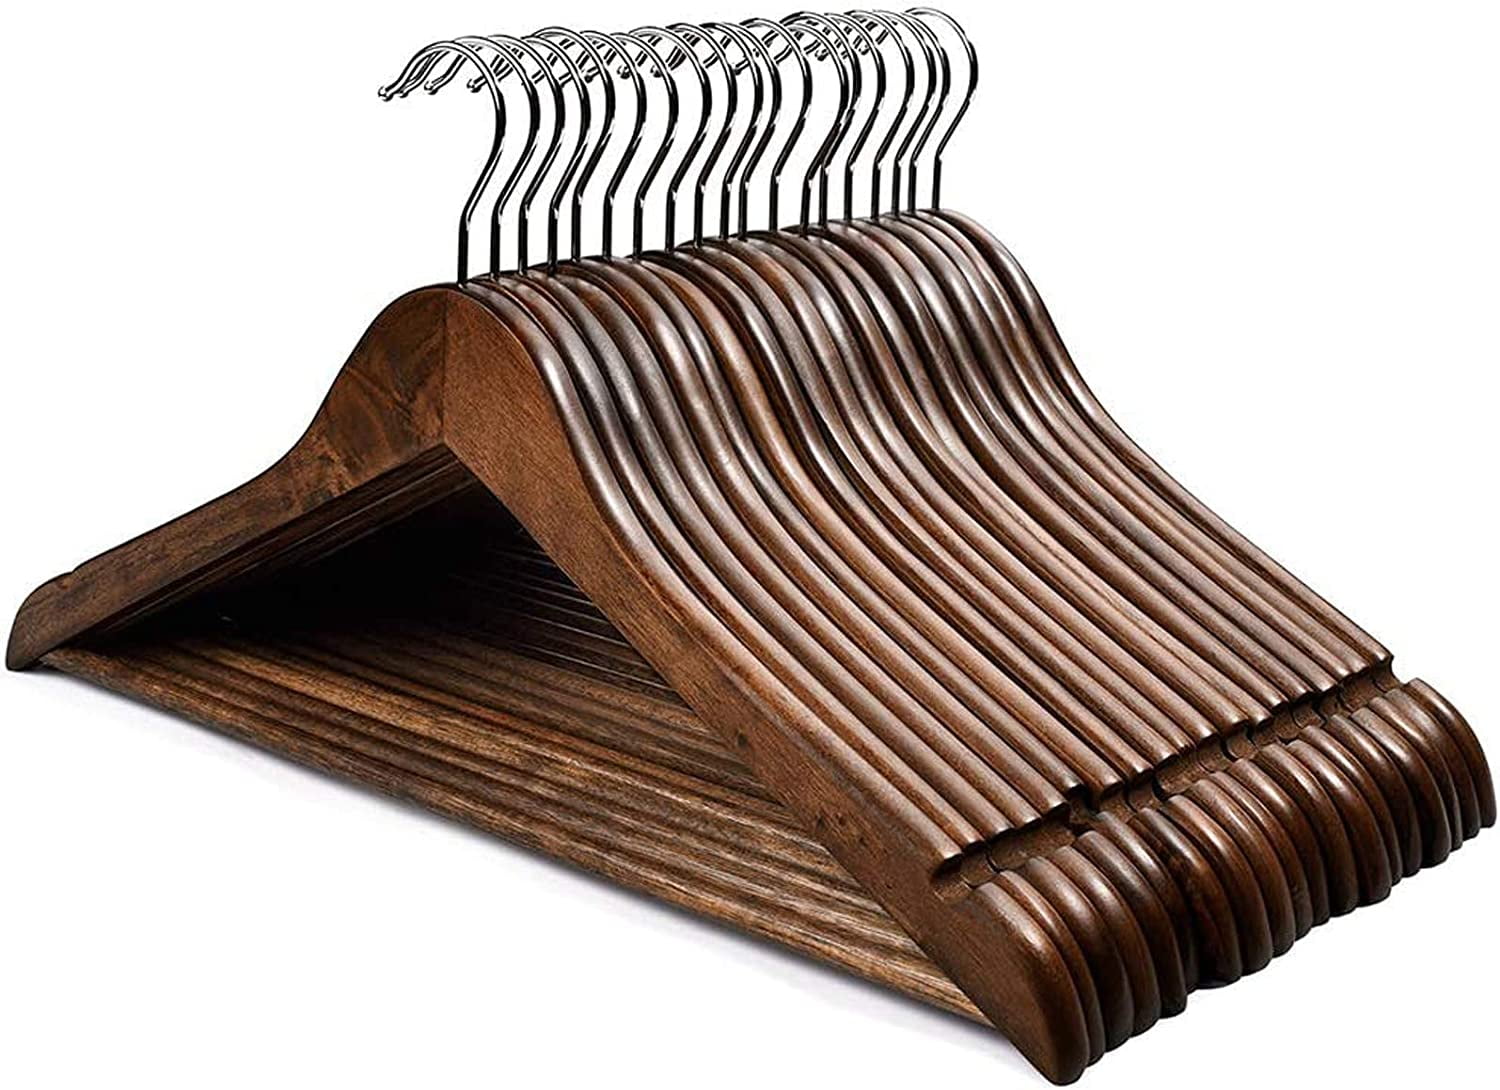 JDGOU Wooden Hangers 20 Pack Clothes Hangers Wood Hangers Walnut Smooth  Finish Coat Hanger for Closet Heavy Duty Hangers for Clothes Dress Suit